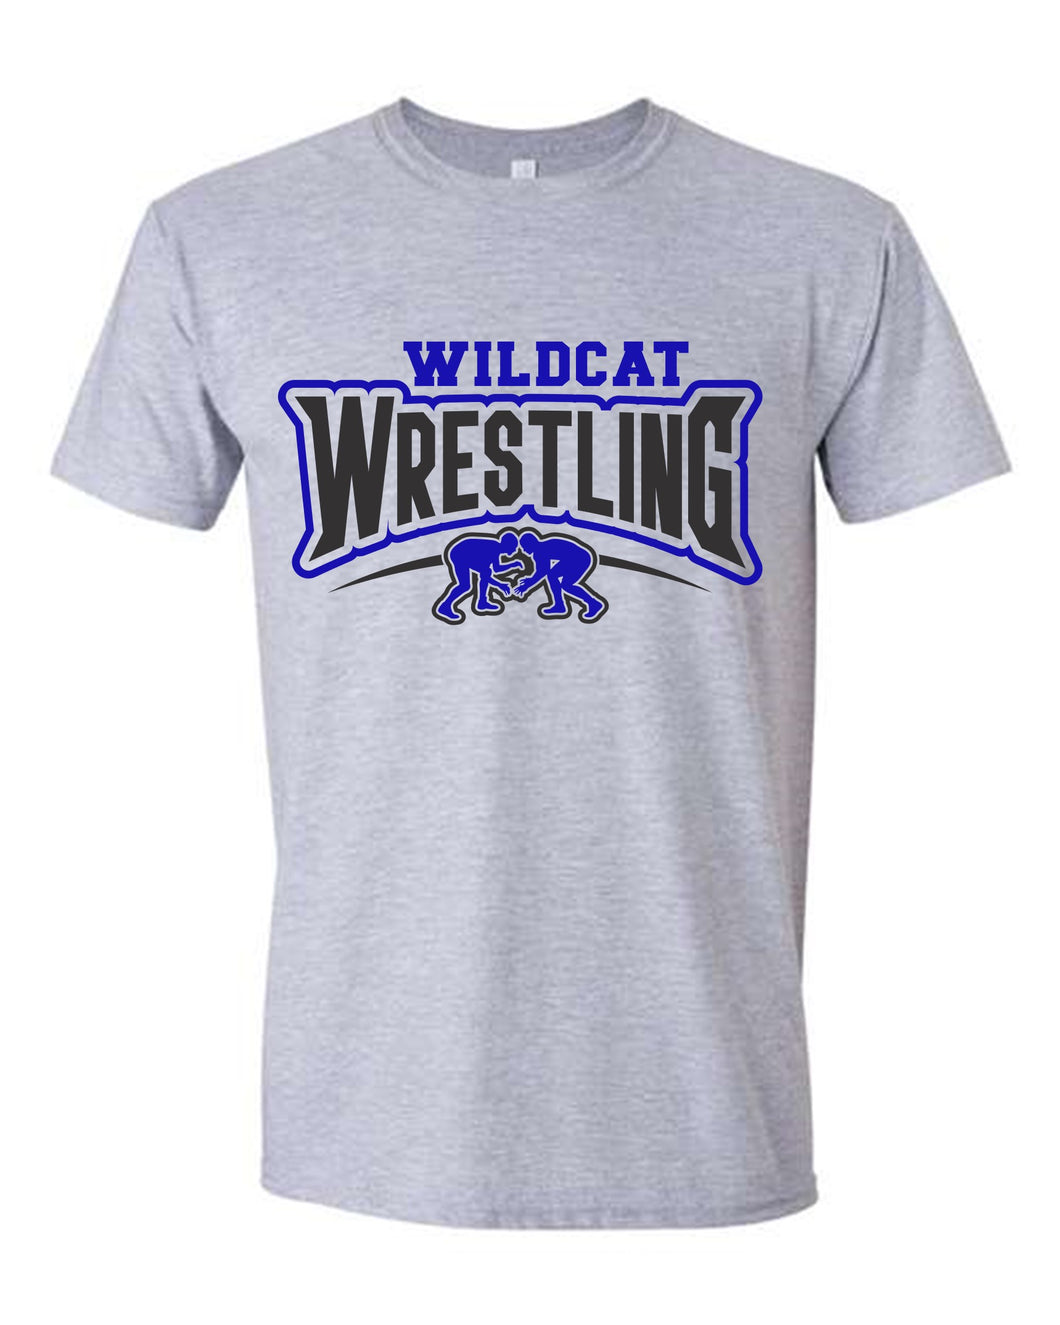 Central Mountain Wildcats Wrestling Style 4 - Click for Additional Styles (Youth and Adult)